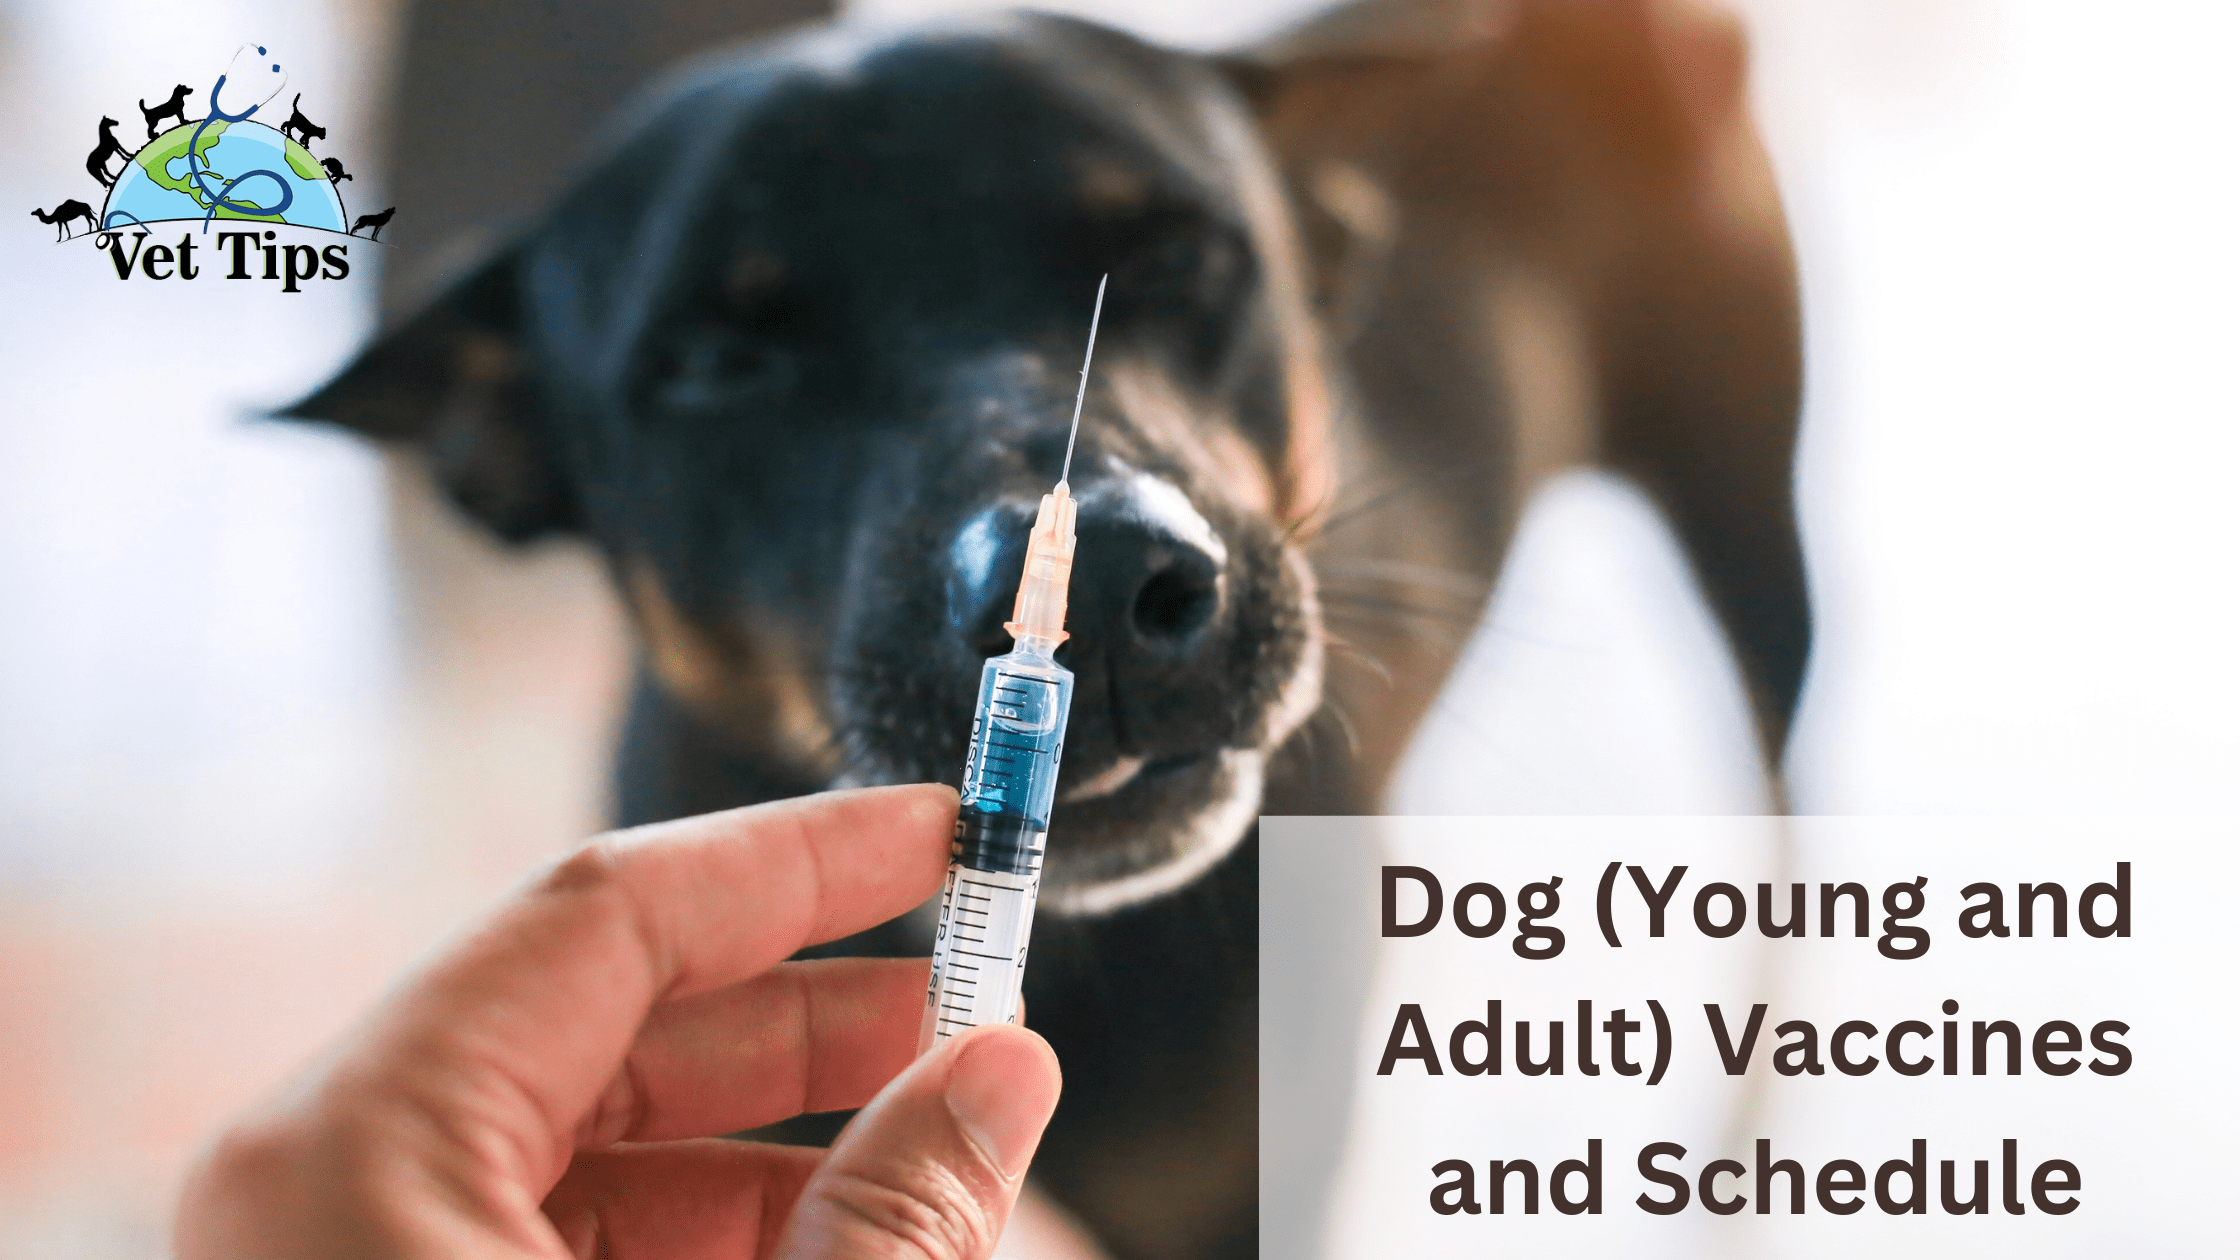 Dog (Young and Adult) Vaccines and Schedule